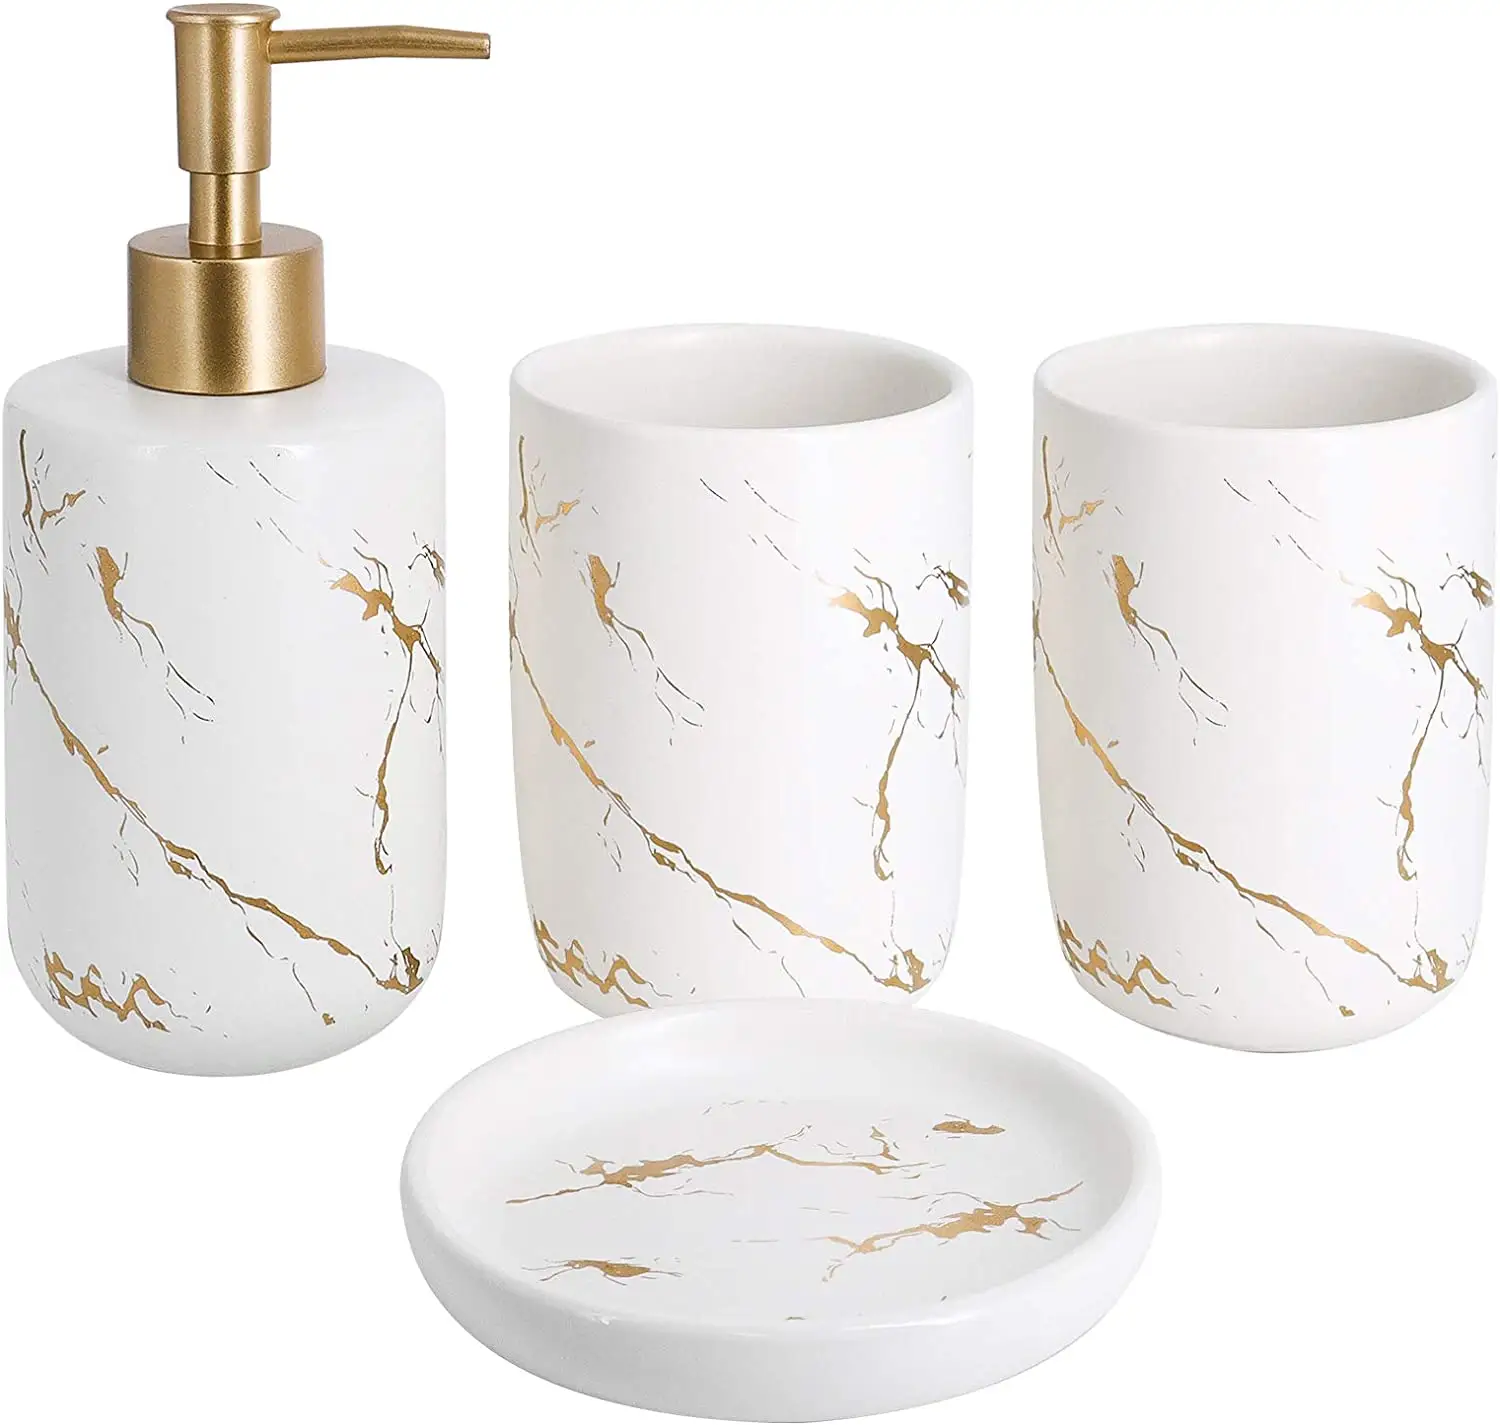 4pcs hot selling gold marble effect ceramic bathroom sets accessories gold